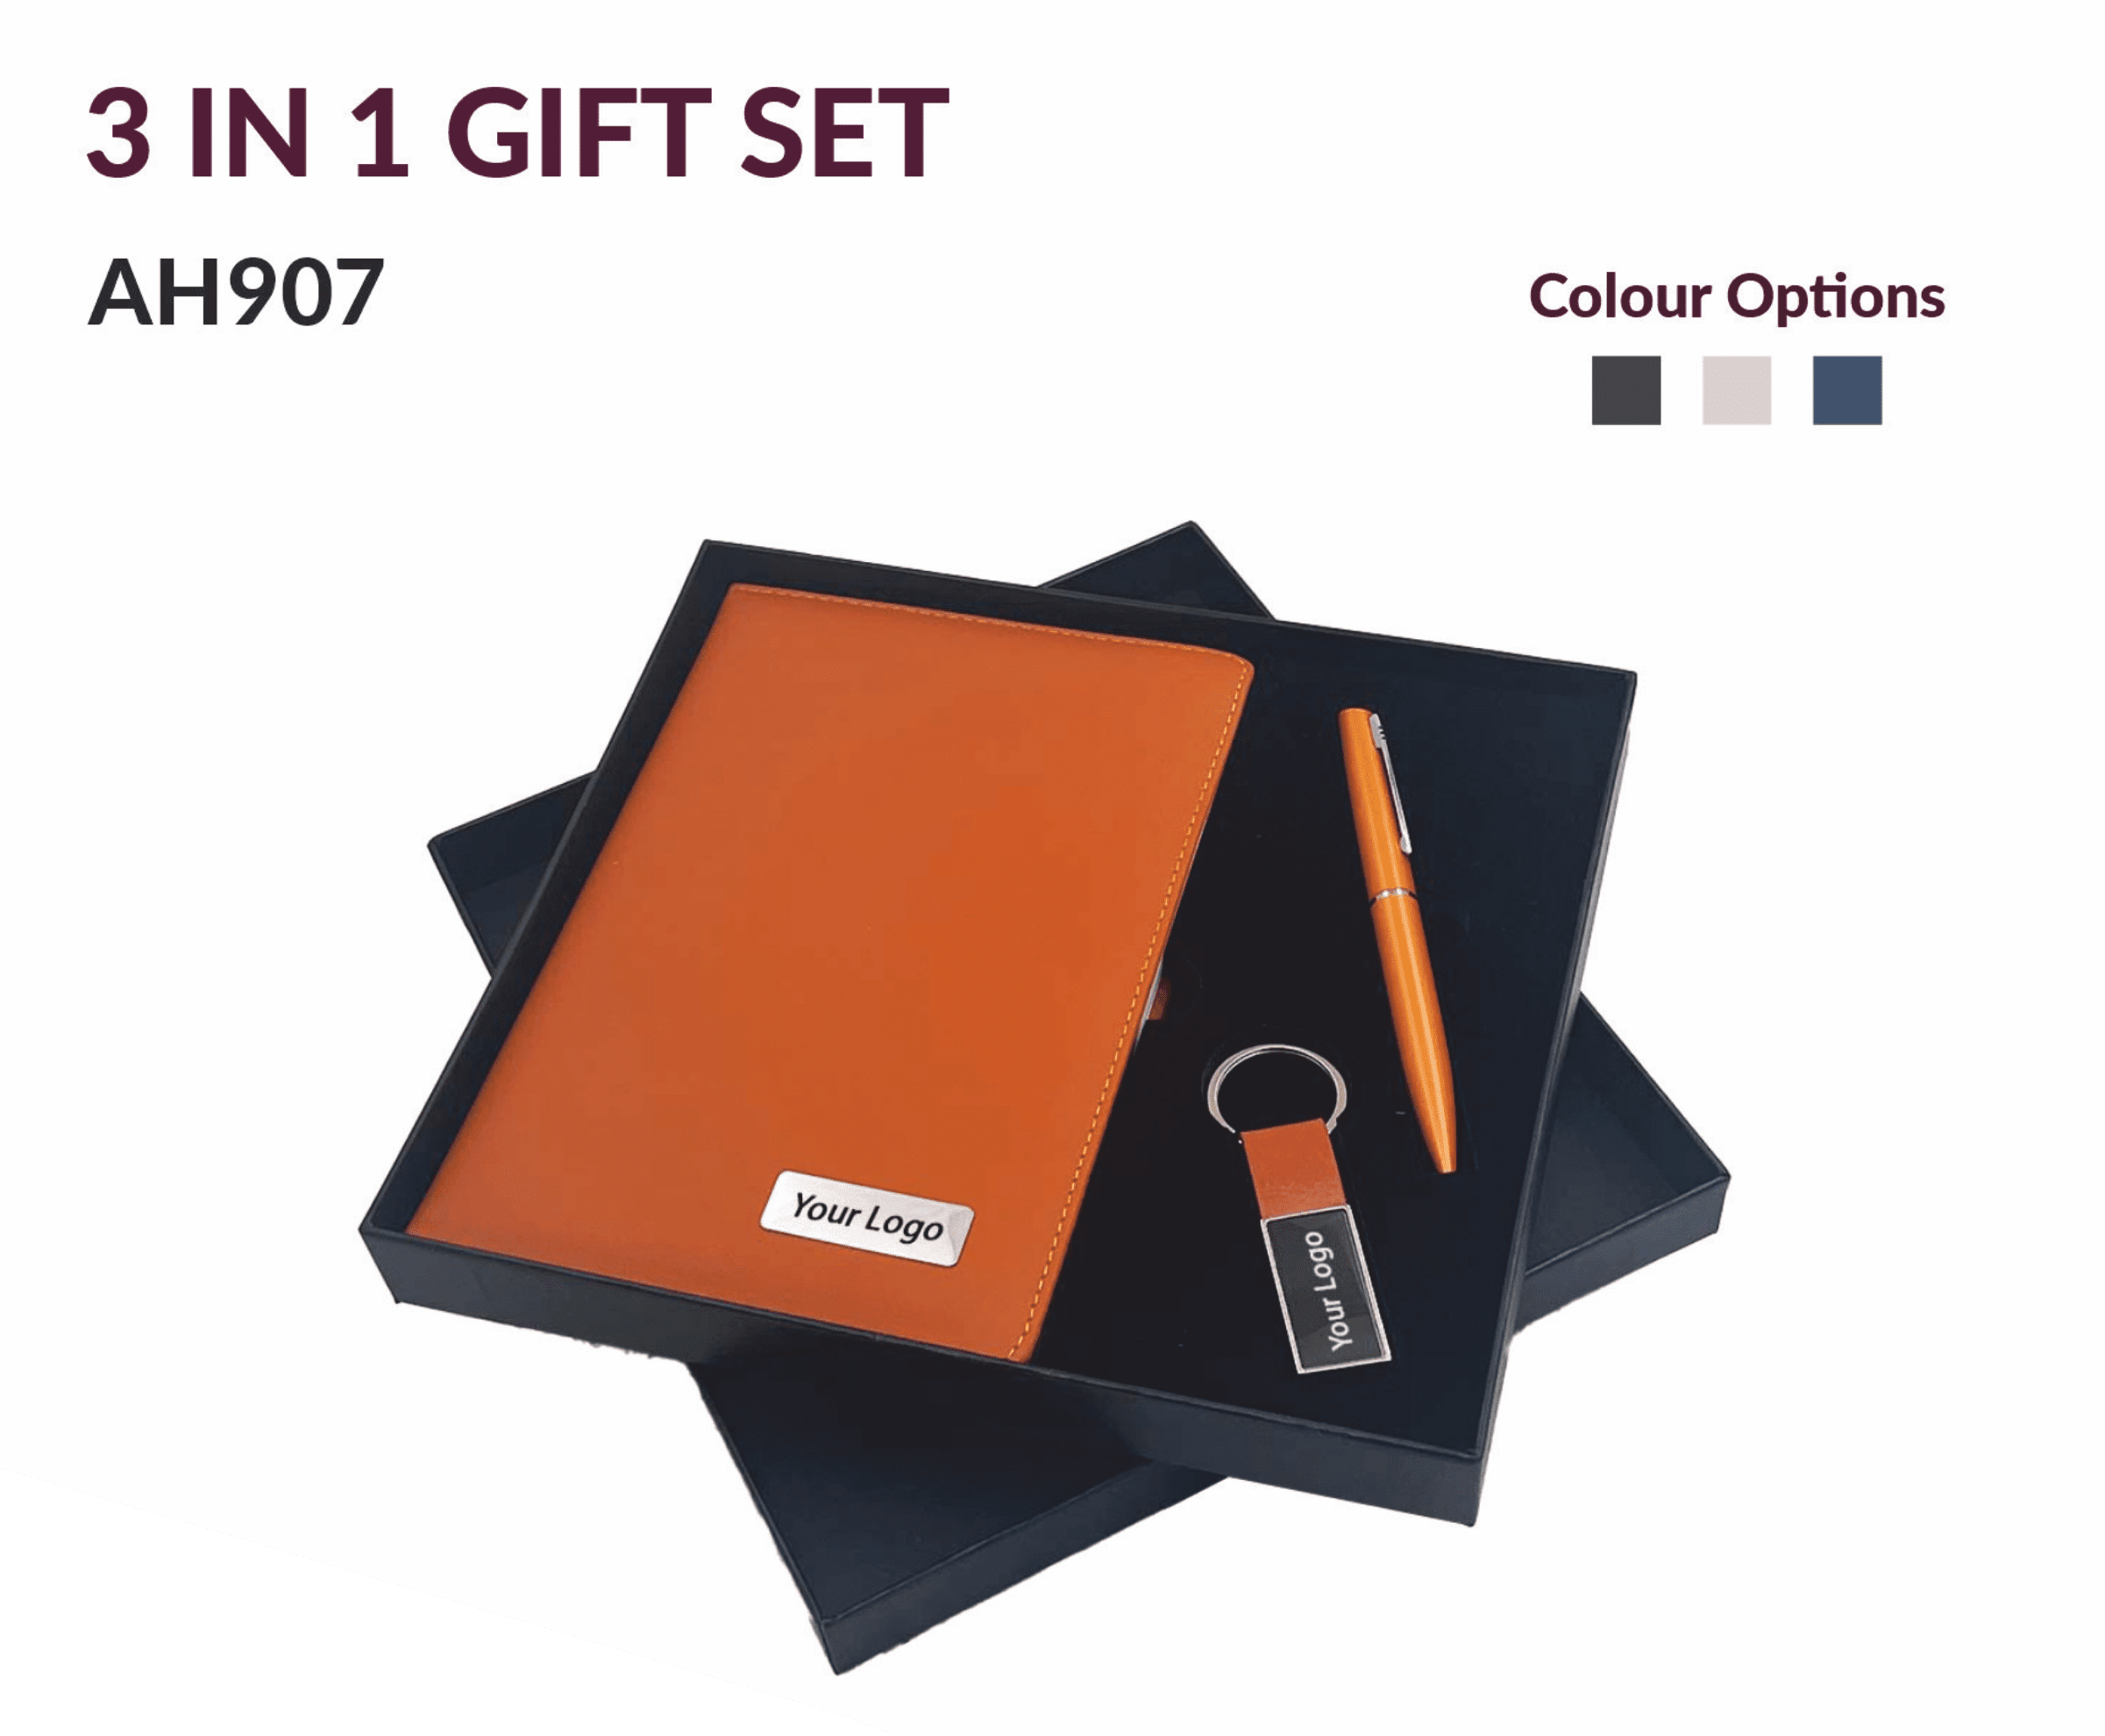 3 IN 1 GIFT SET